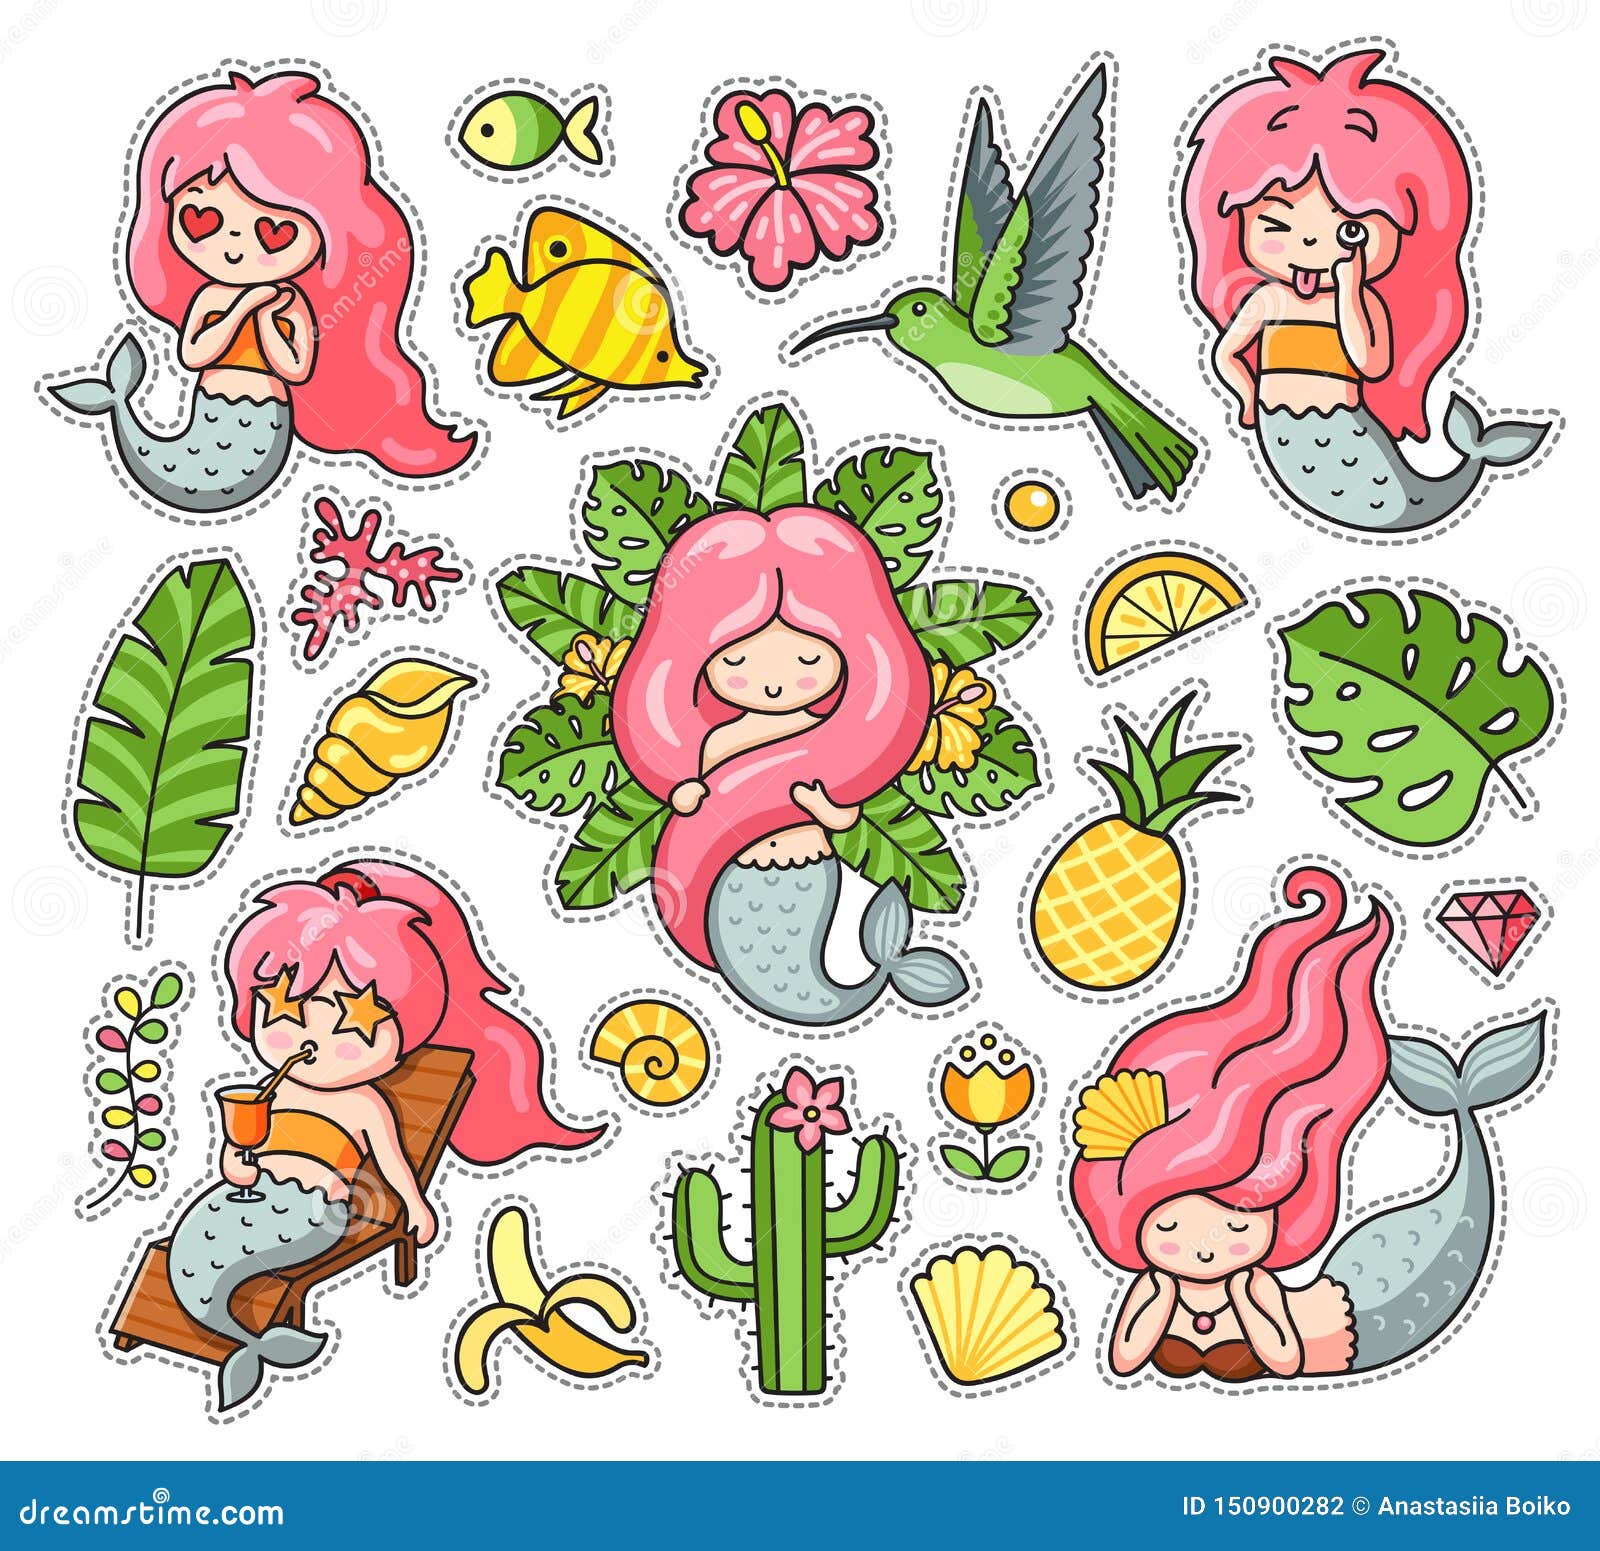 https://thumbs.dreamstime.com/z/little-funny-mermaids-hummingbird-fish-tropical-leaves-fruits-sea-shell-set-summer-cartoon-stickers-patches-badges-pins-150900282.jpg